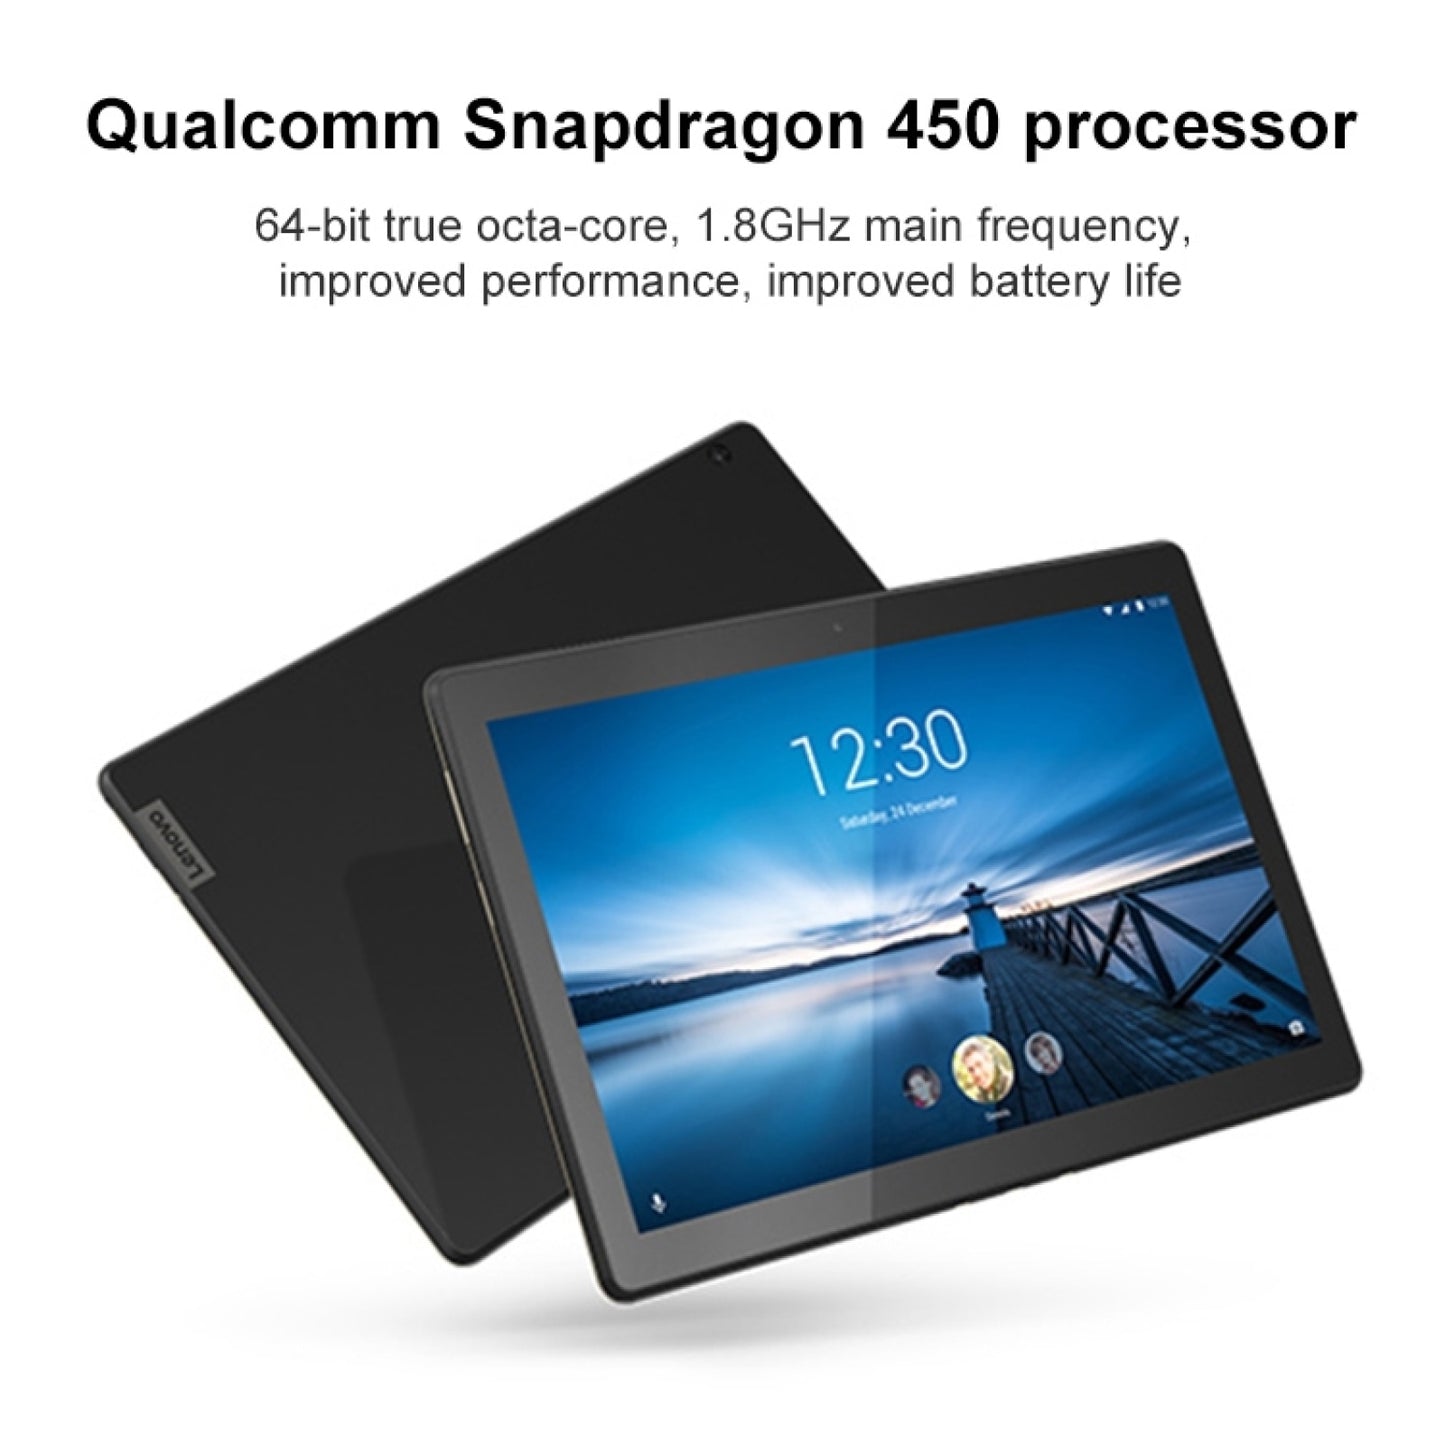 Original Lenovo Tab M10 TB-X605F WiFi TB-X605M 4G LTE 10.1 inch 2GB 16GB Android 8.0 Qualcomm Snapdragon 450 Octa-core Tablet PC